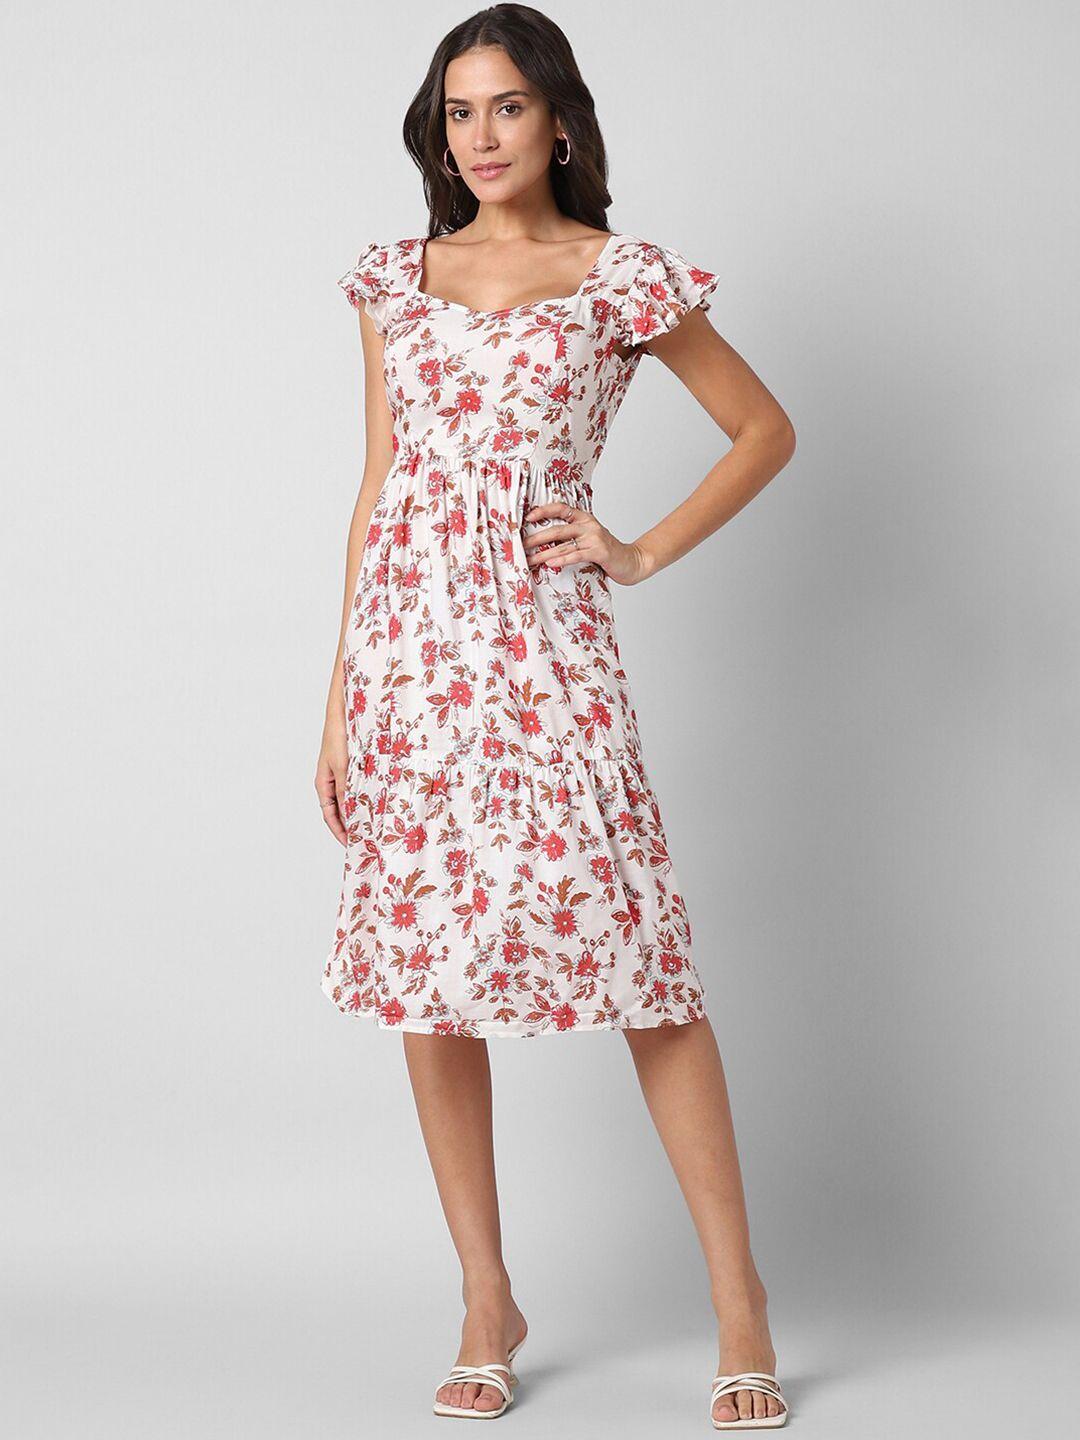 pantaloons floral printed sweetheart neck flutter sleeves fit & flare dress